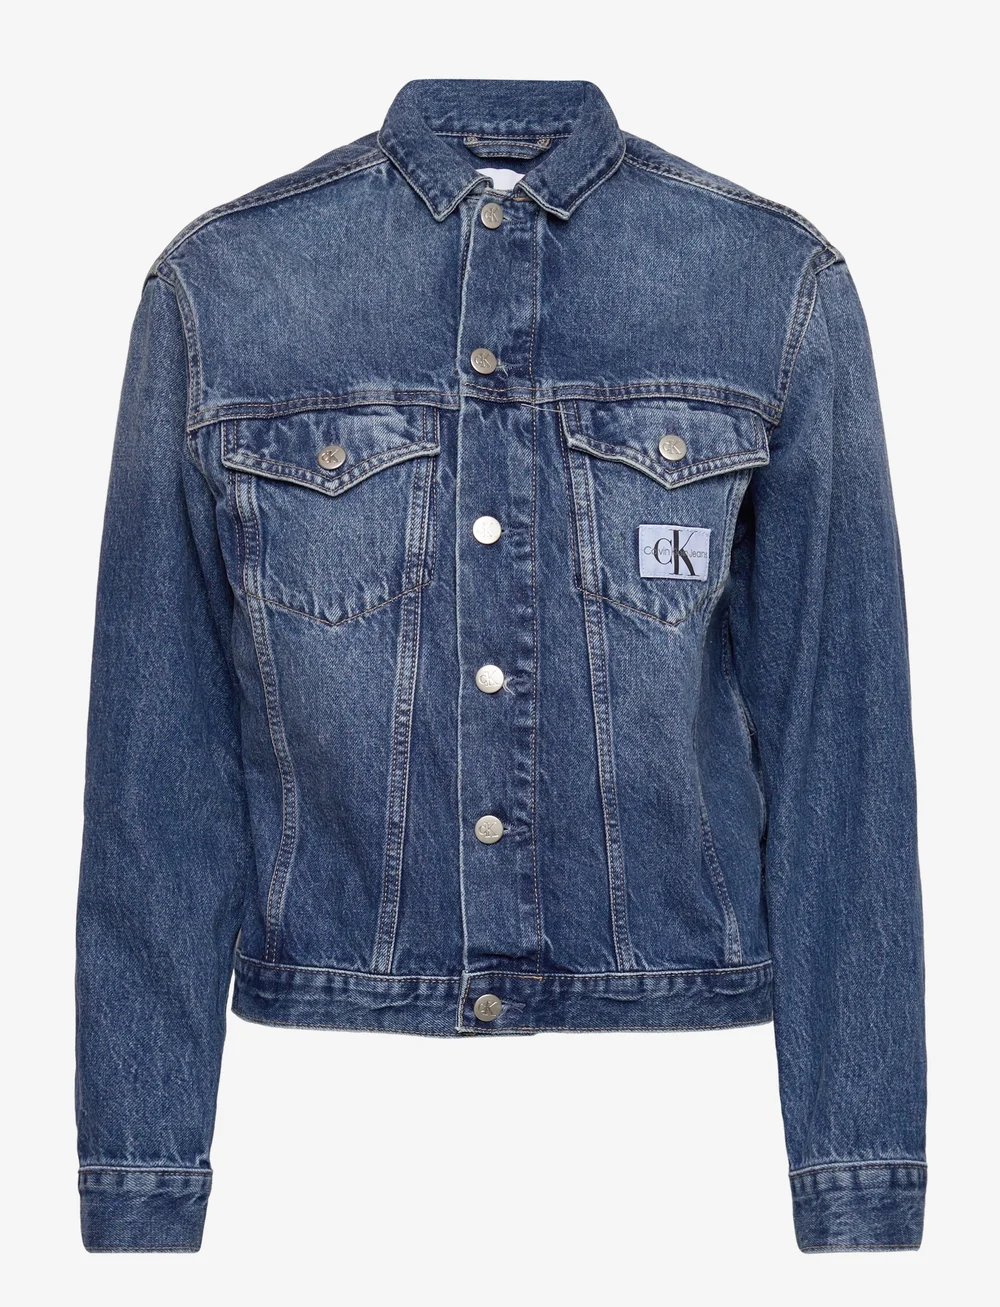 Calvin Klein Jeans Regular Archive Jacket - 59.94 €. Denim jackets from Calvin Klein Jeans online Boozt.com. delivery and easy returns